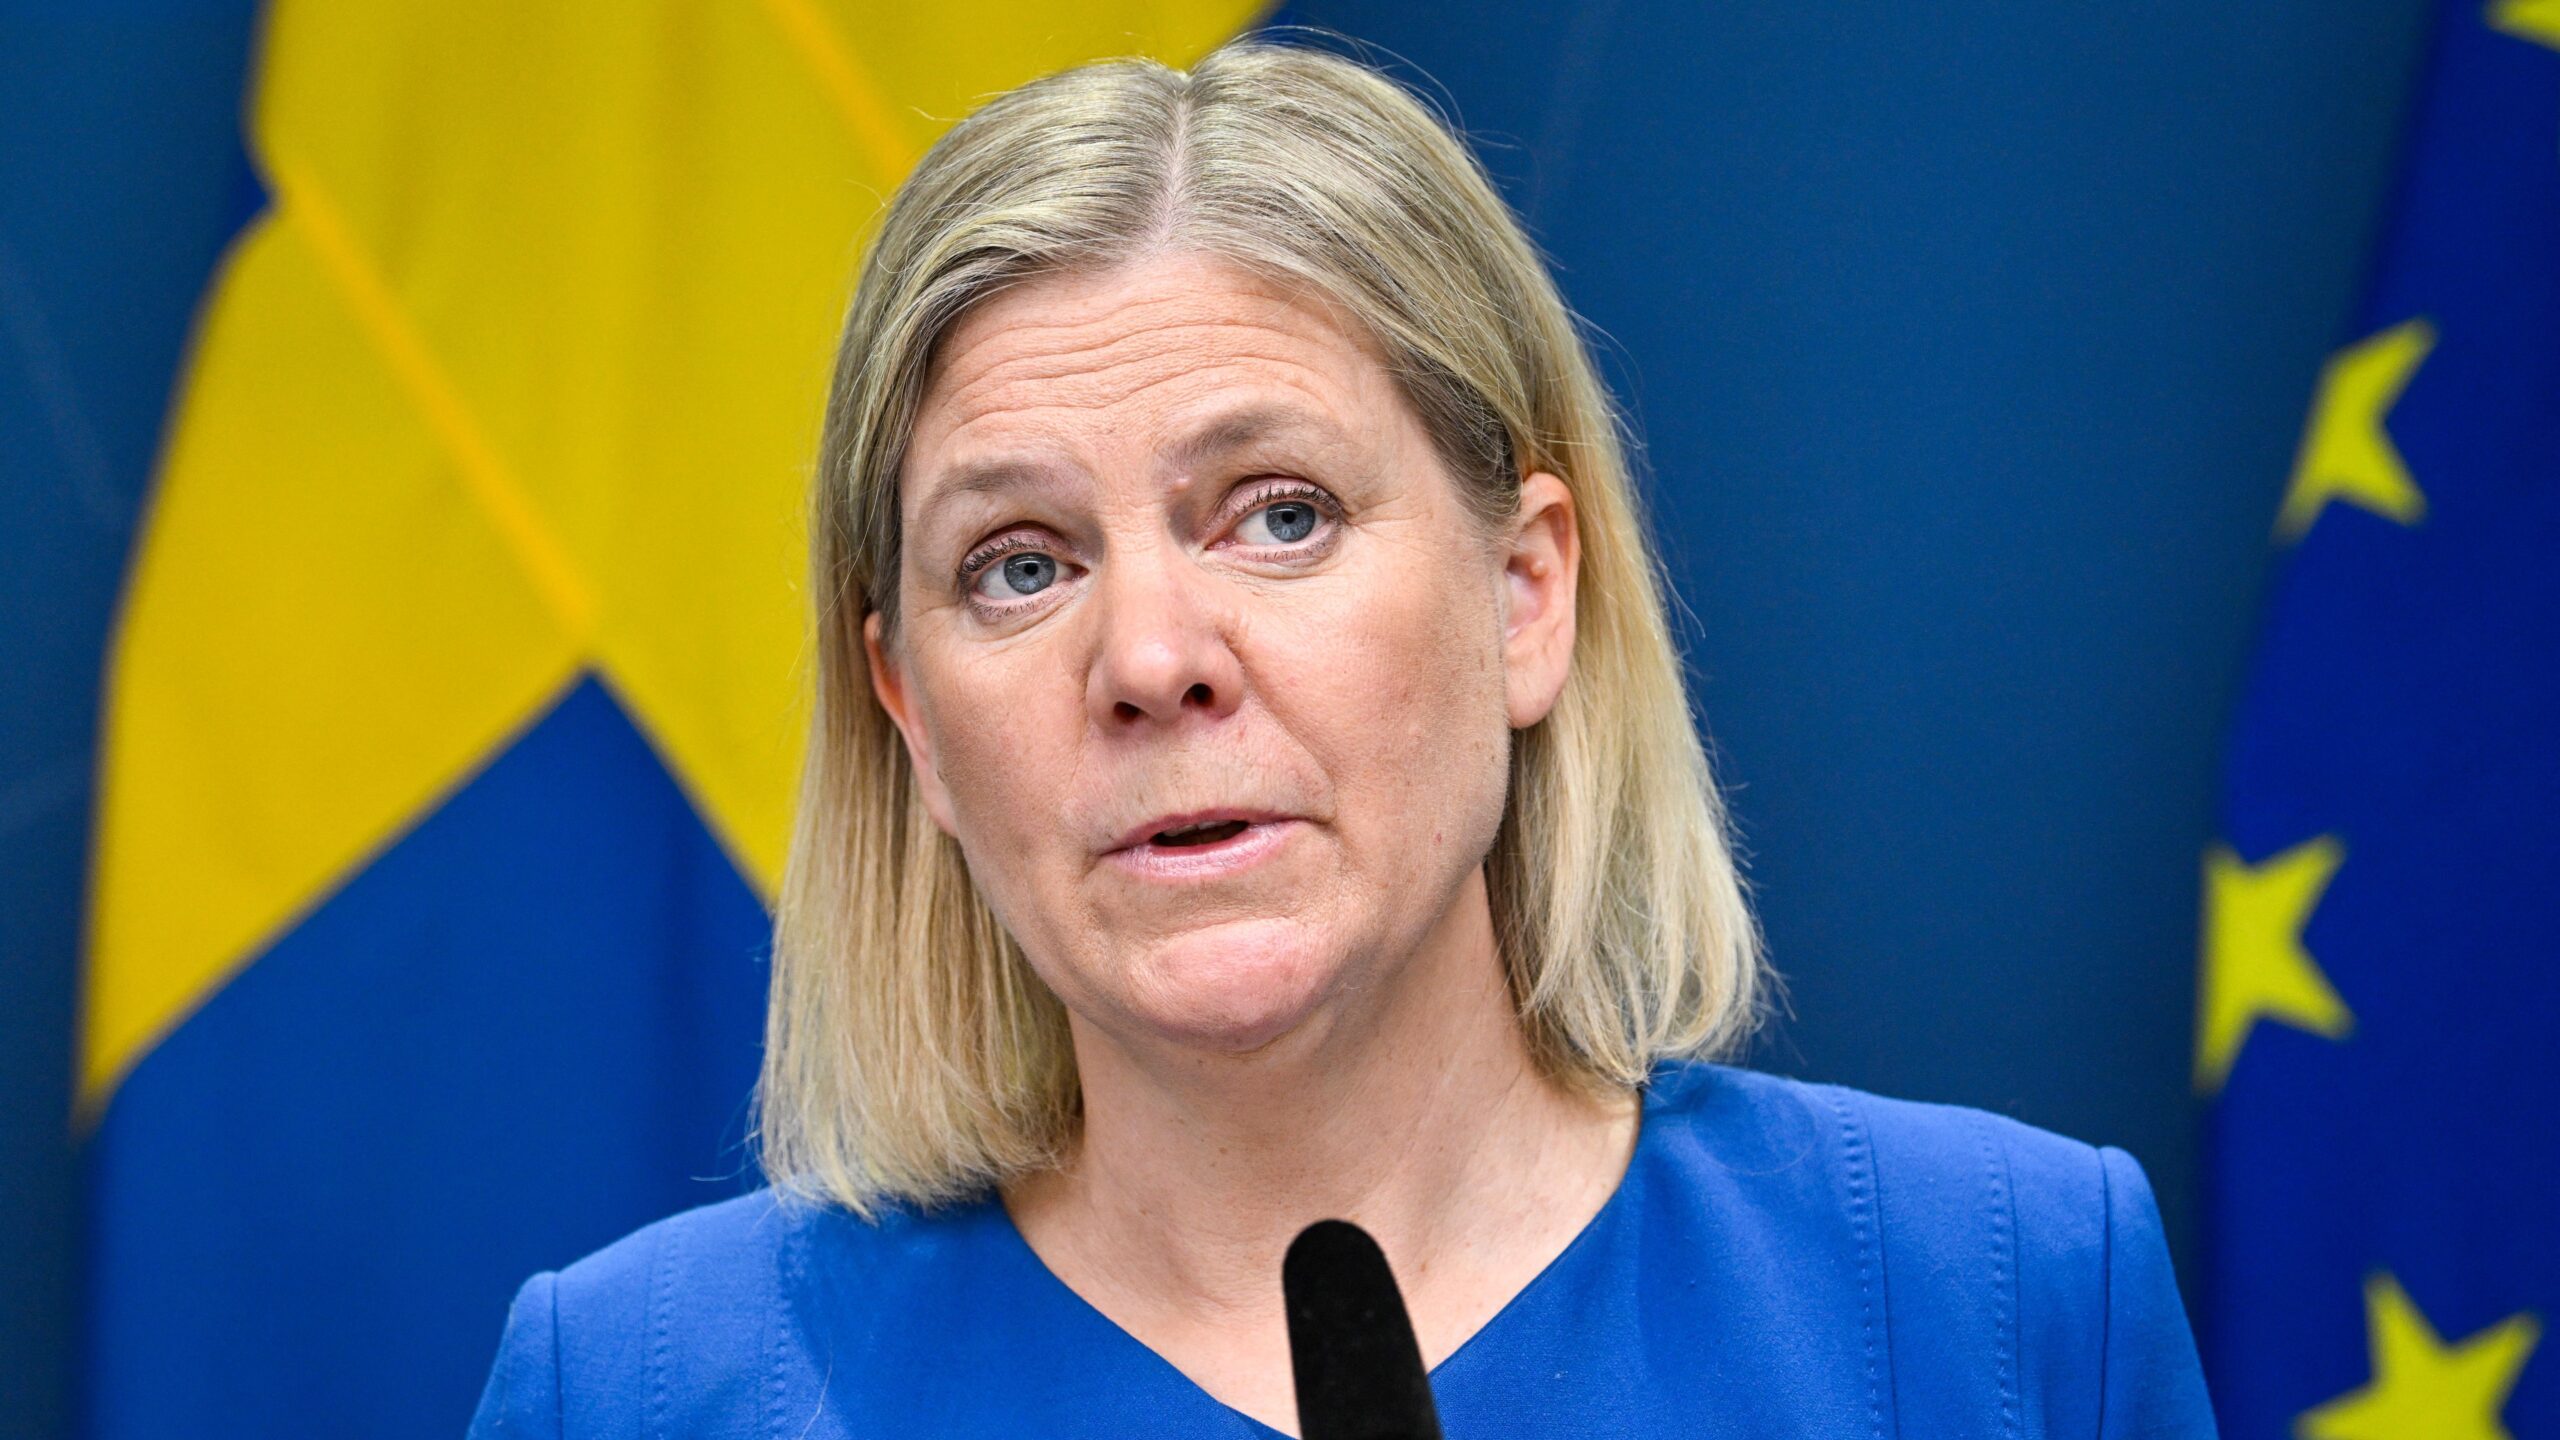 Sweden applying for NATO membership; other Nordic nations pledge security support